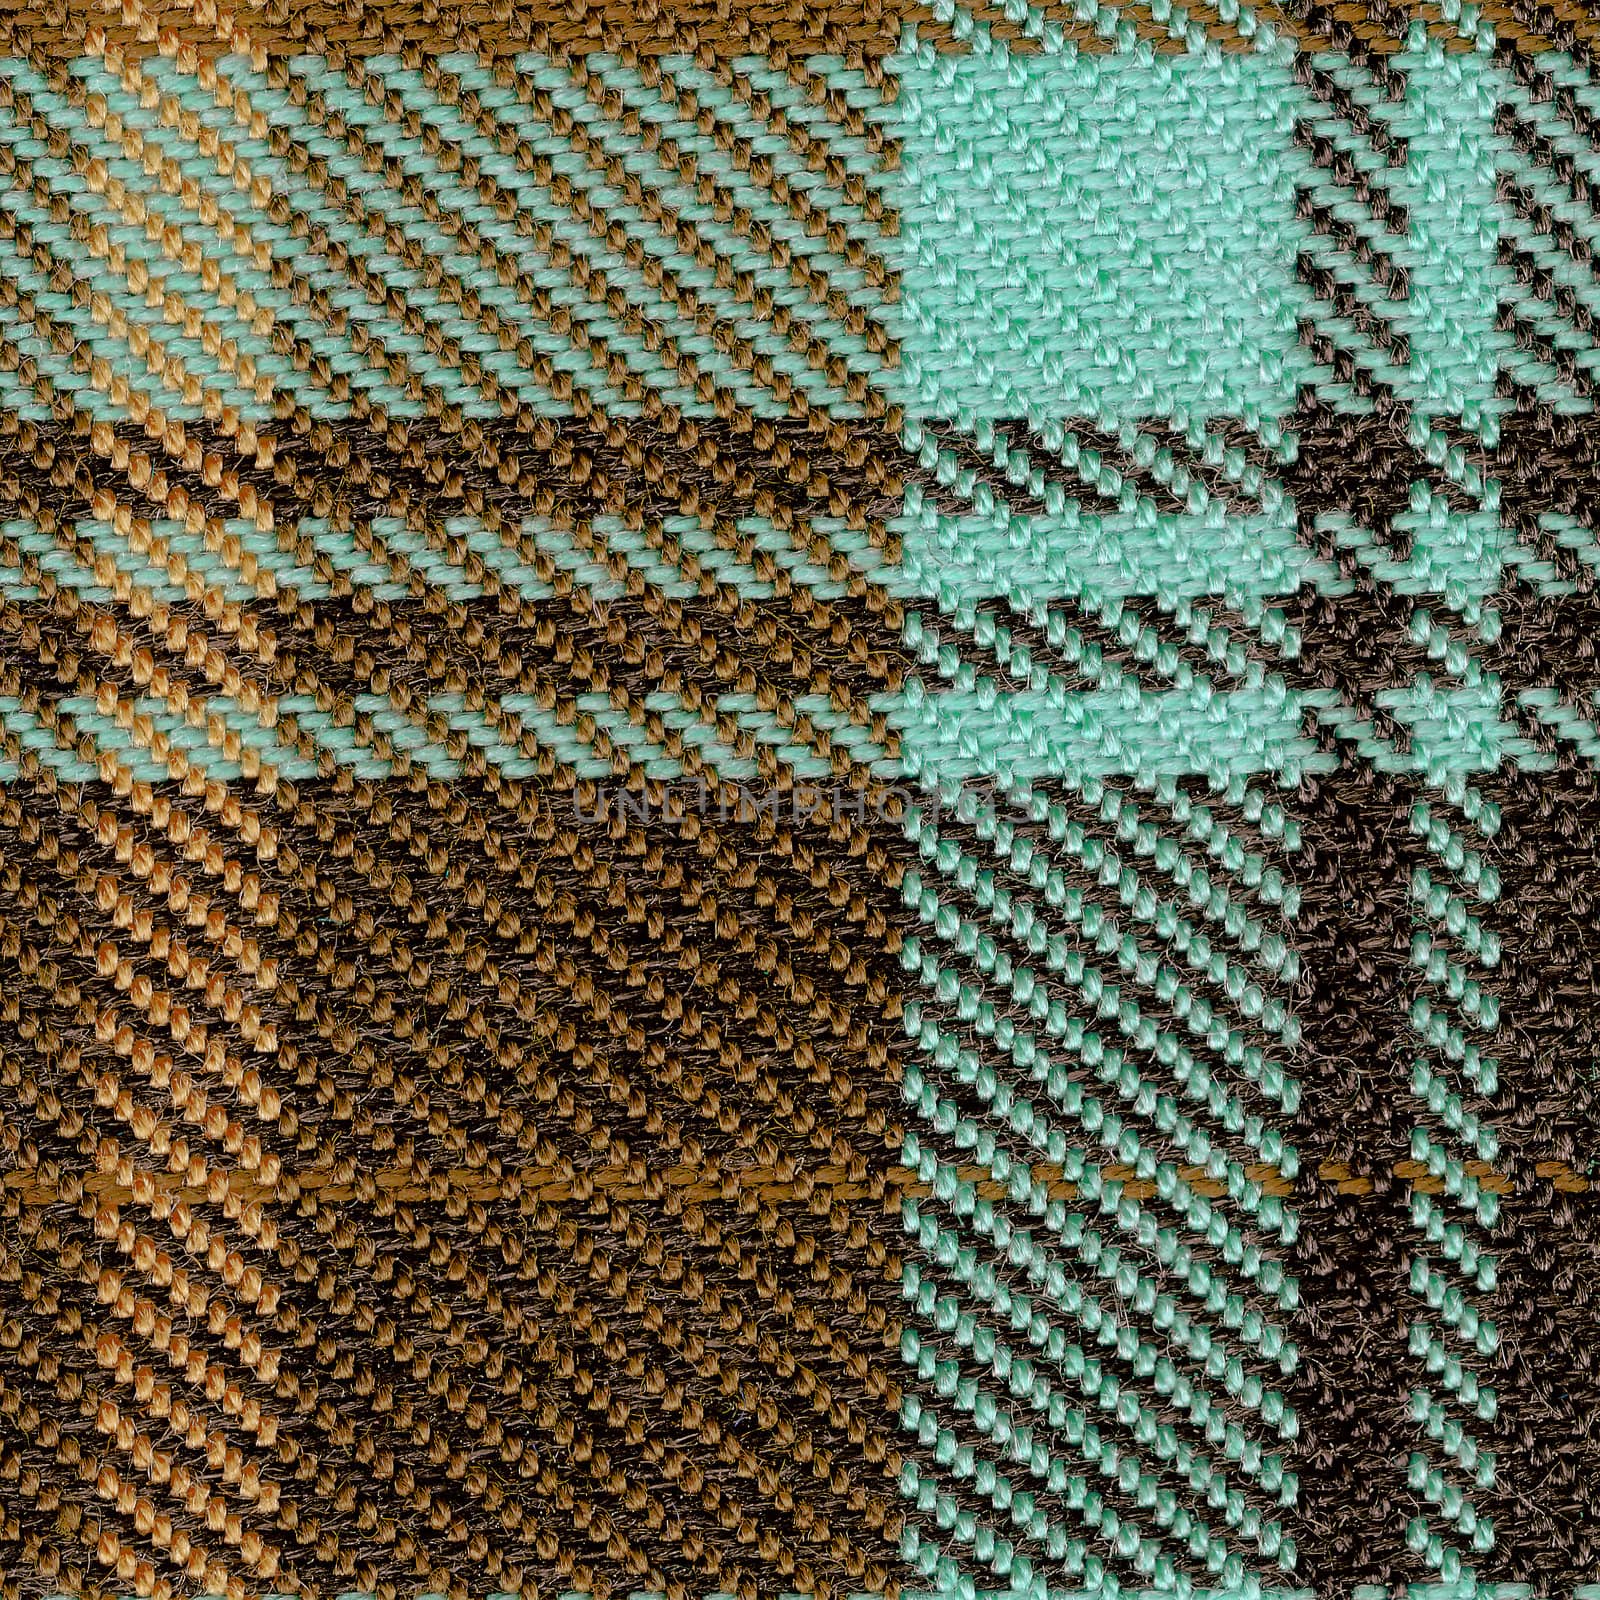 fabric plaid texture. (High.res.scan) by mg1408